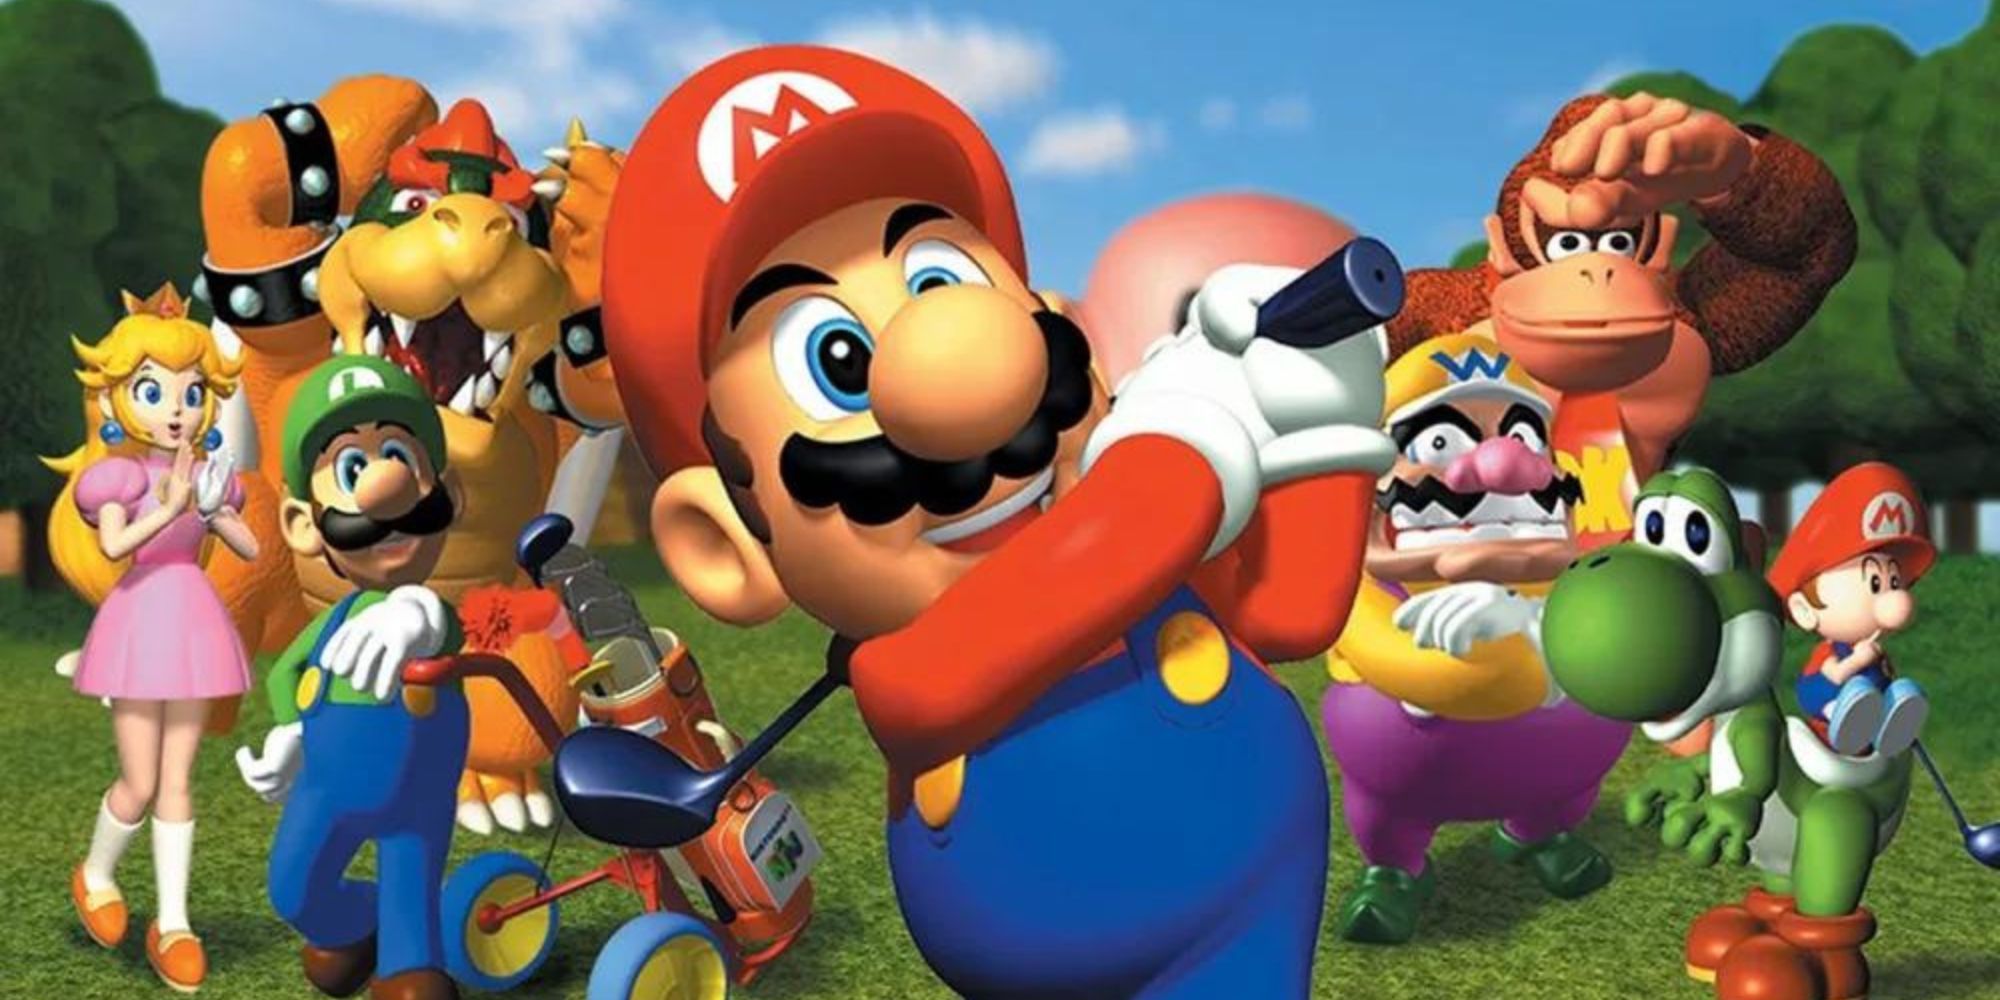 A group of Nintendo characters watch Mario swing his club